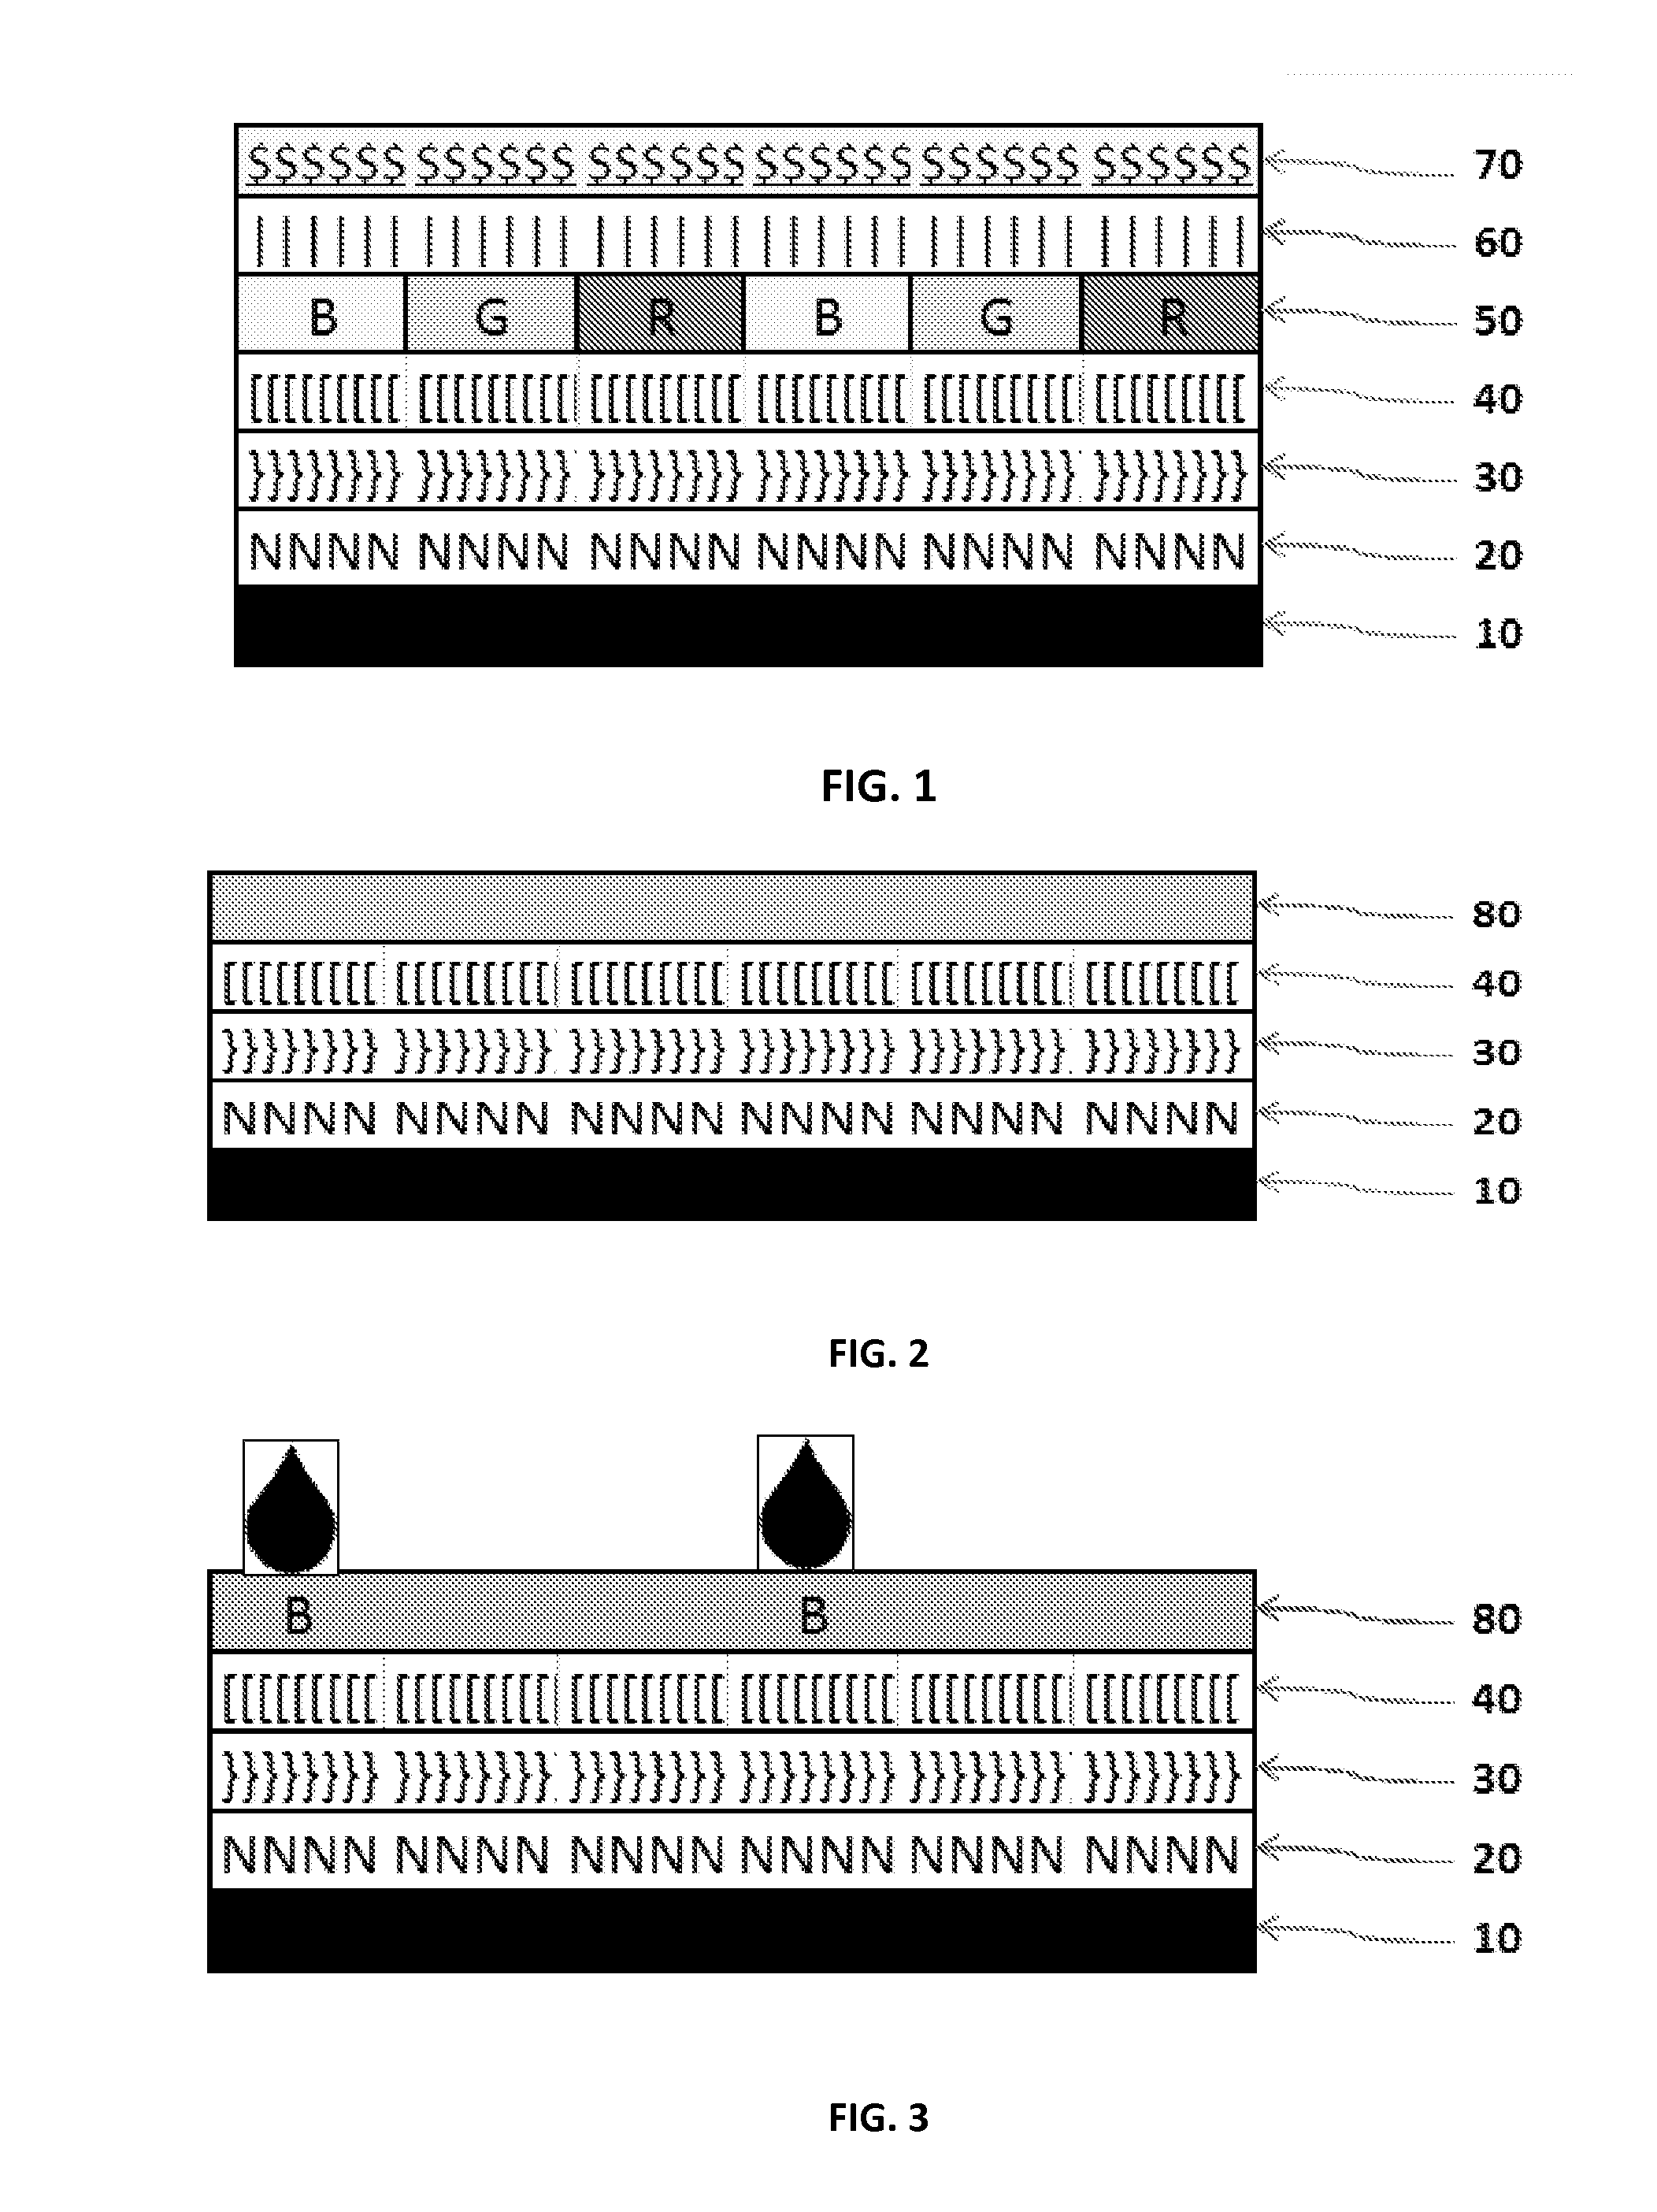 Crosslinkable, /Polymerizable and Combinations Thereof Charge-transporting Molecular Glass Mixtures, Luminescent Molecular Glass Mixtures, or Combinations Thereof for Organic Light Emitting Diodes and other Organic Electronics and Photonics Applications and Mothod of Making Same.